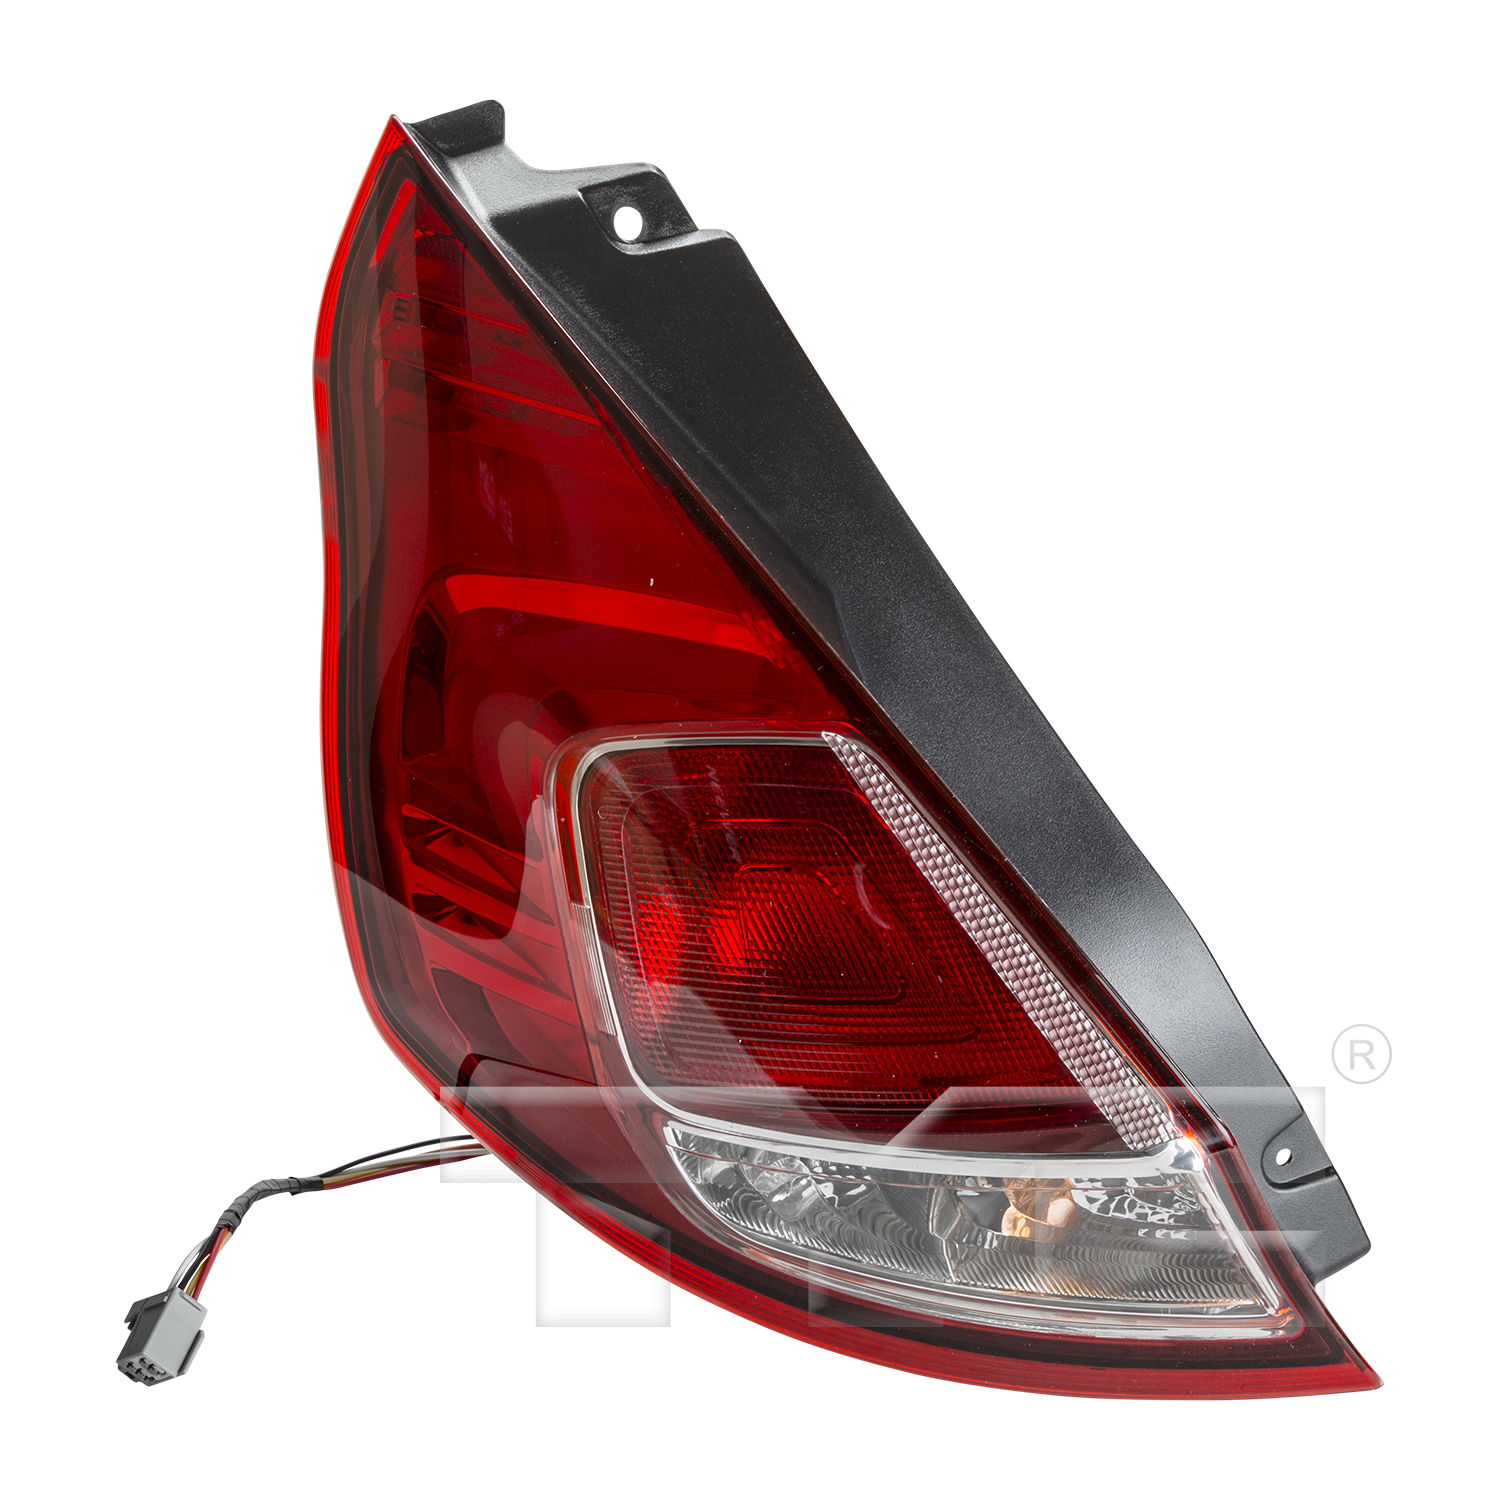 Aftermarket TAILLIGHTS for FORD - FIESTA, FIESTA,14-18,LT Taillamp assy